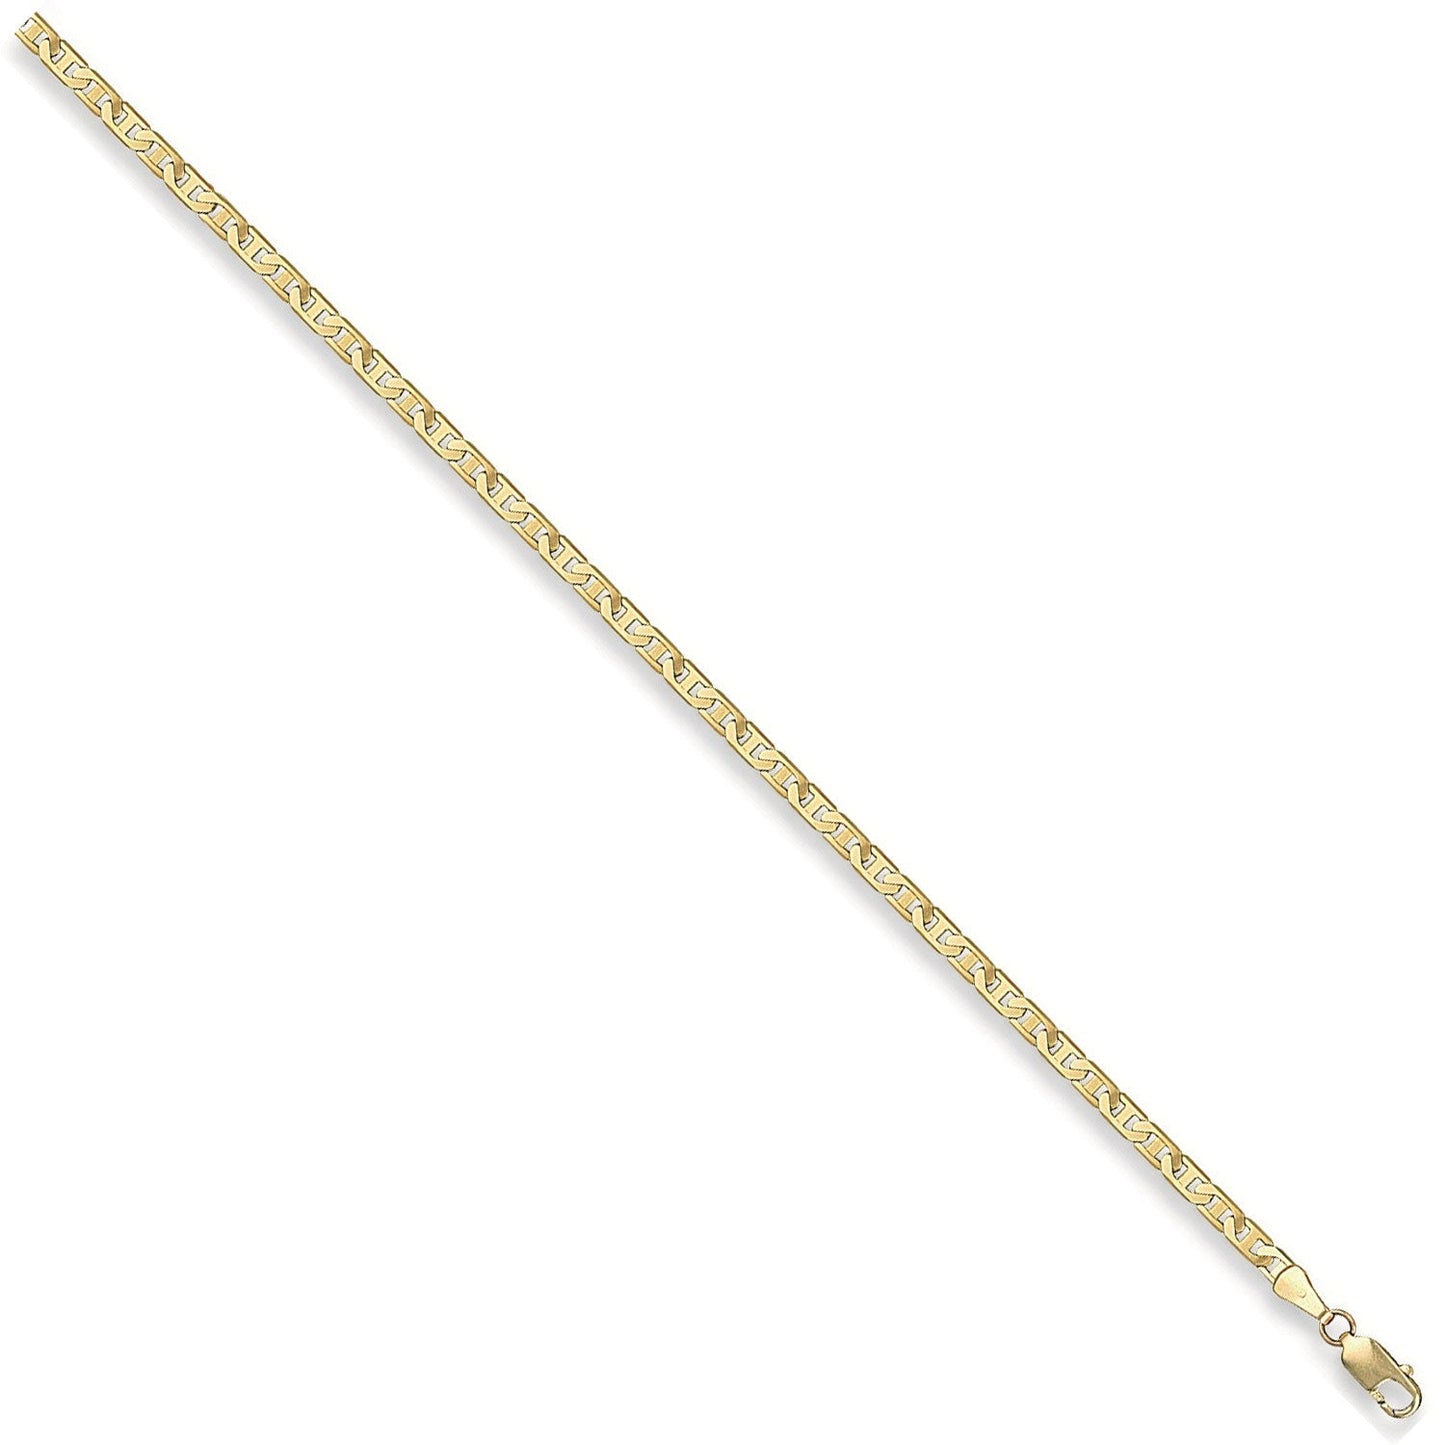 9ct Yellow Gold 3mm Flat Anchor Bracelet 7" - FJewellery